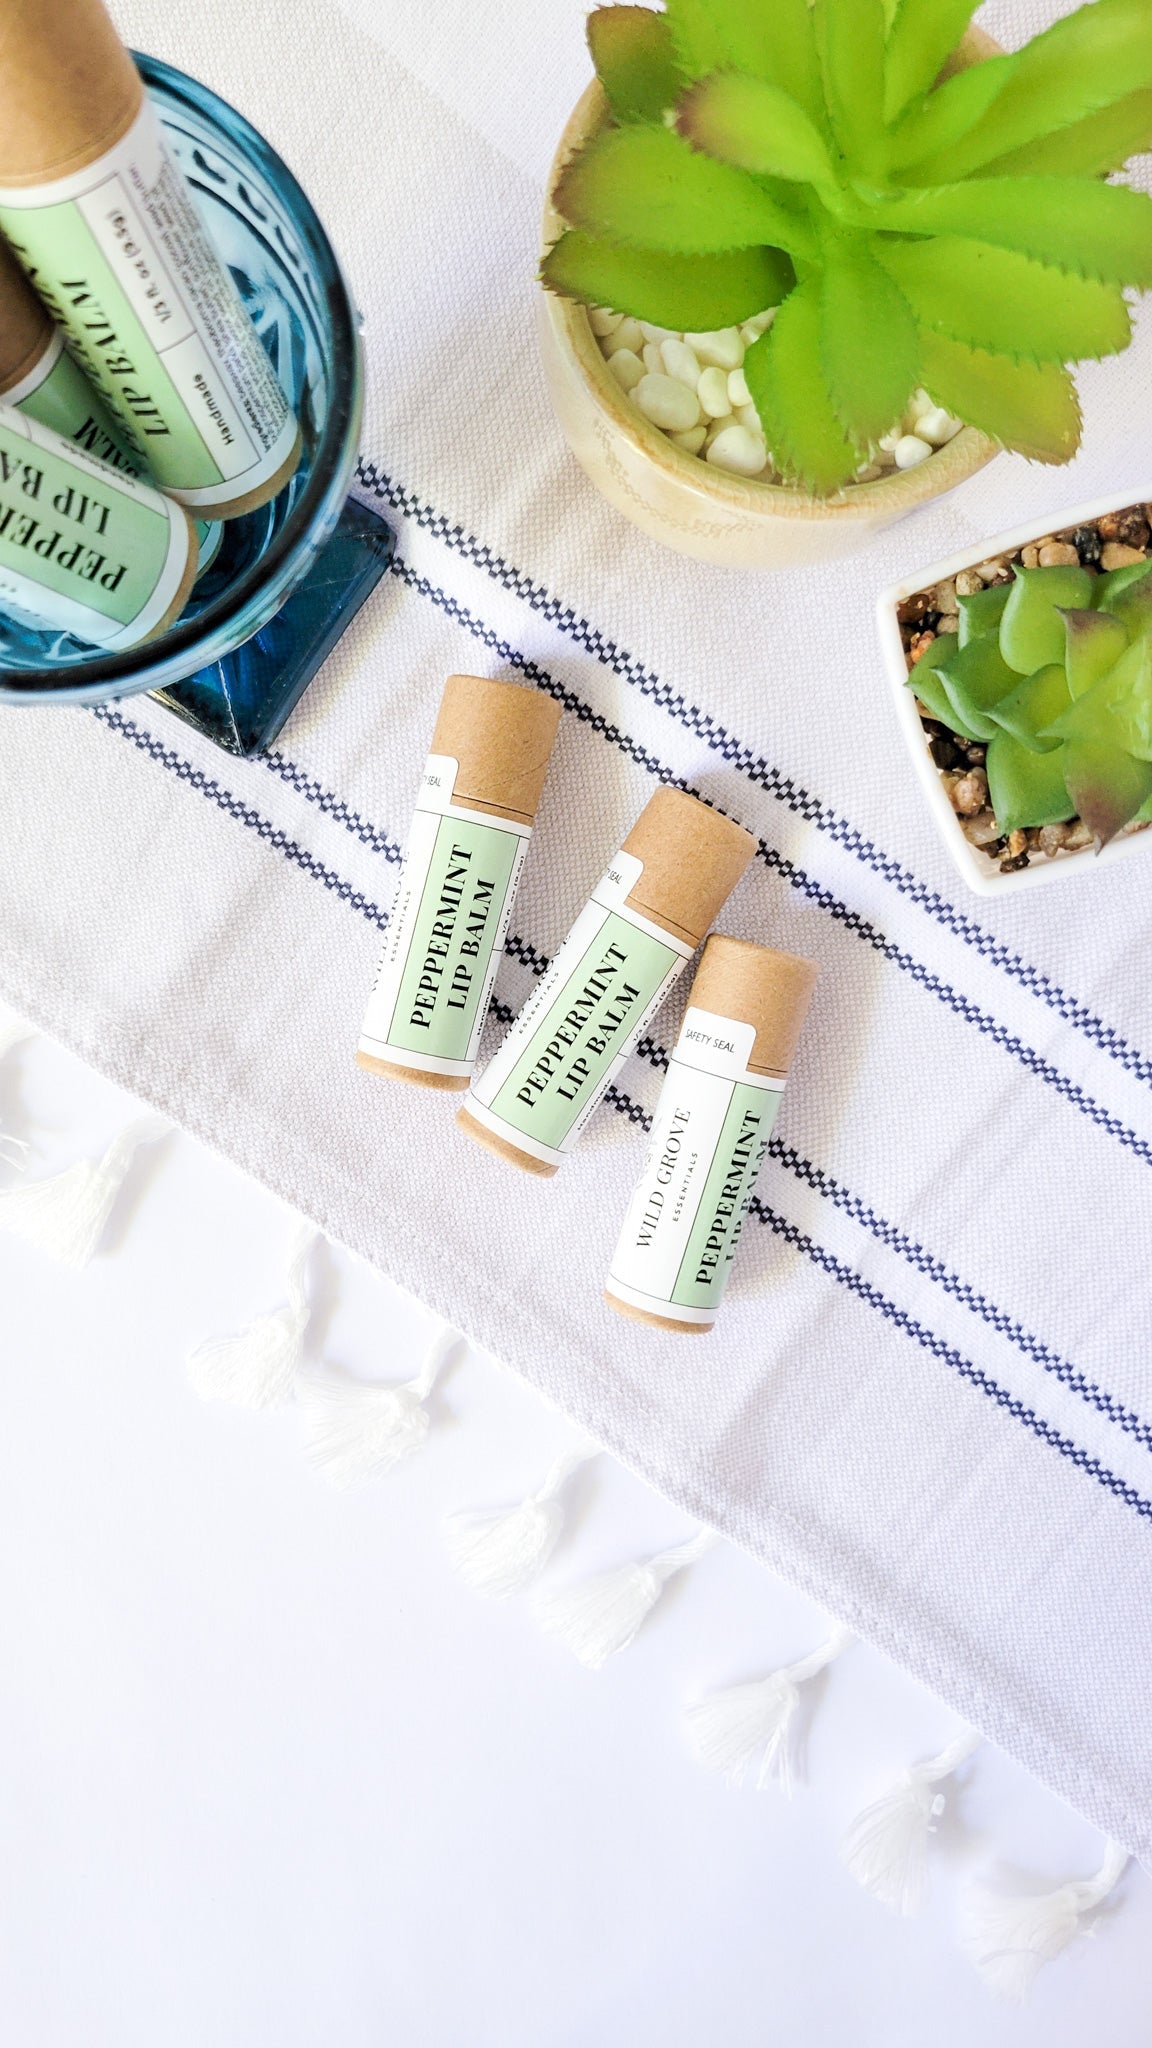 Lip Balm, All-Natural Beeswax in Cardboard Tube